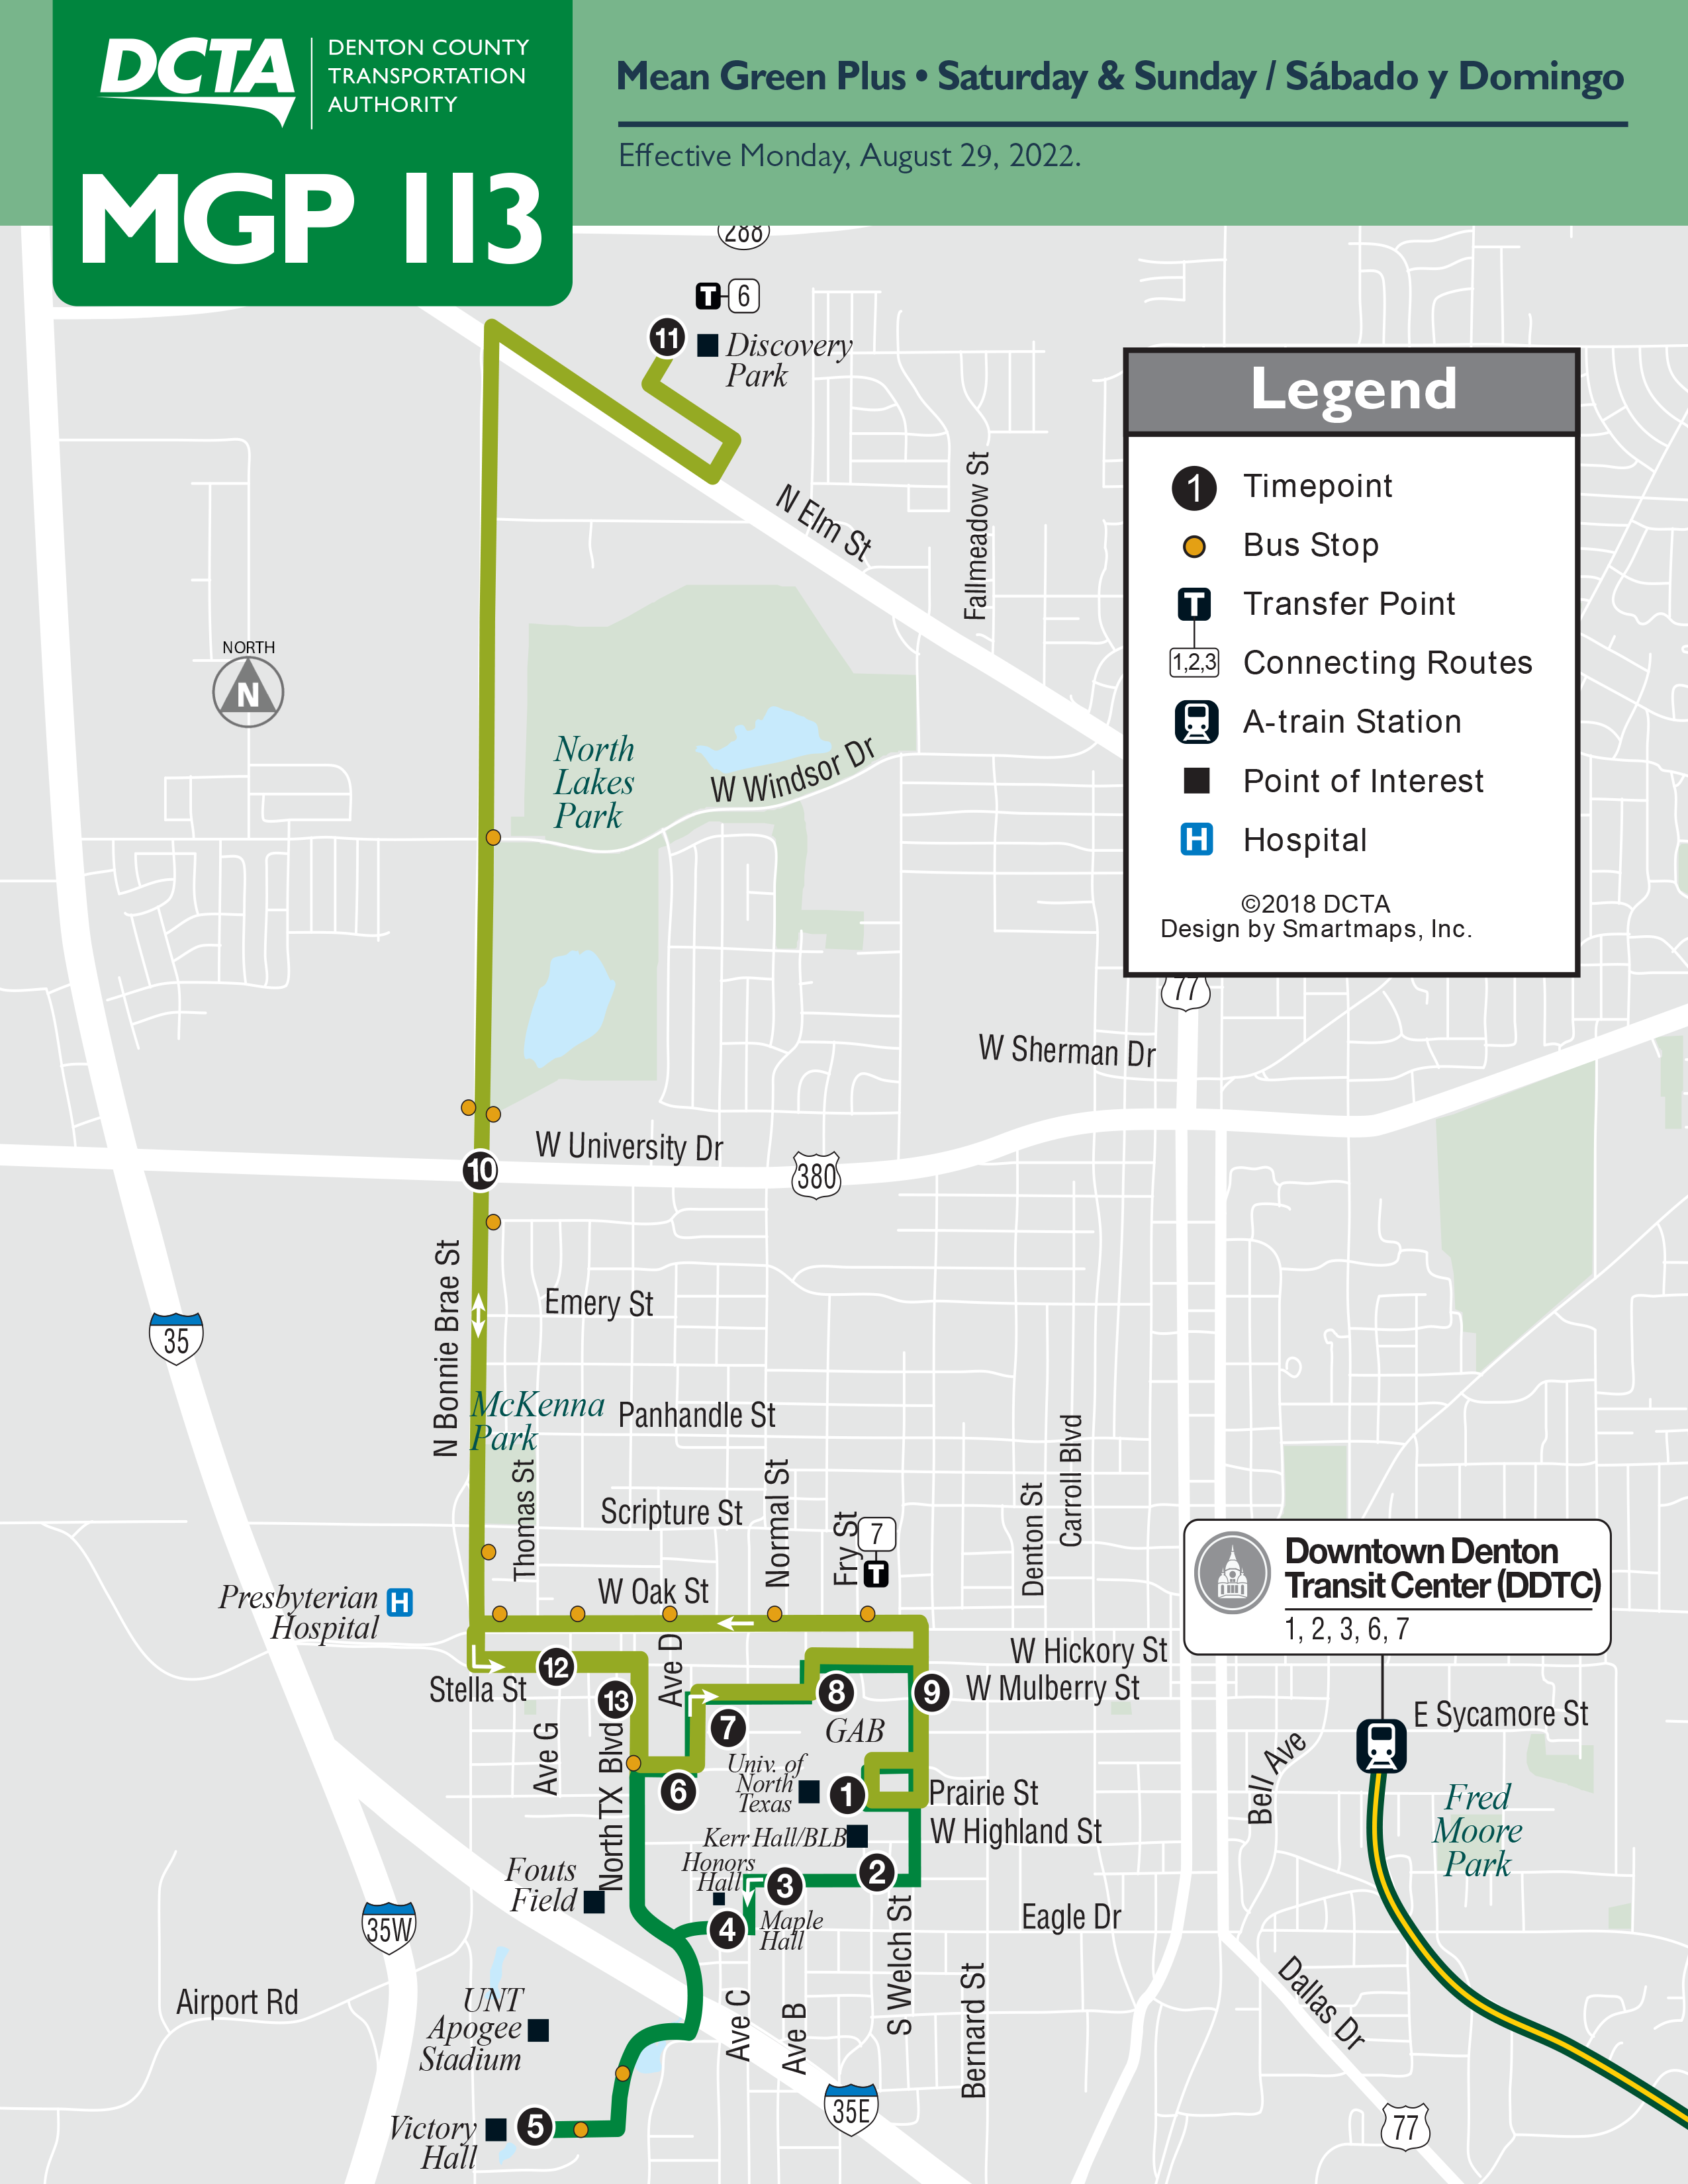 Mean Green Plus Route 113 Map